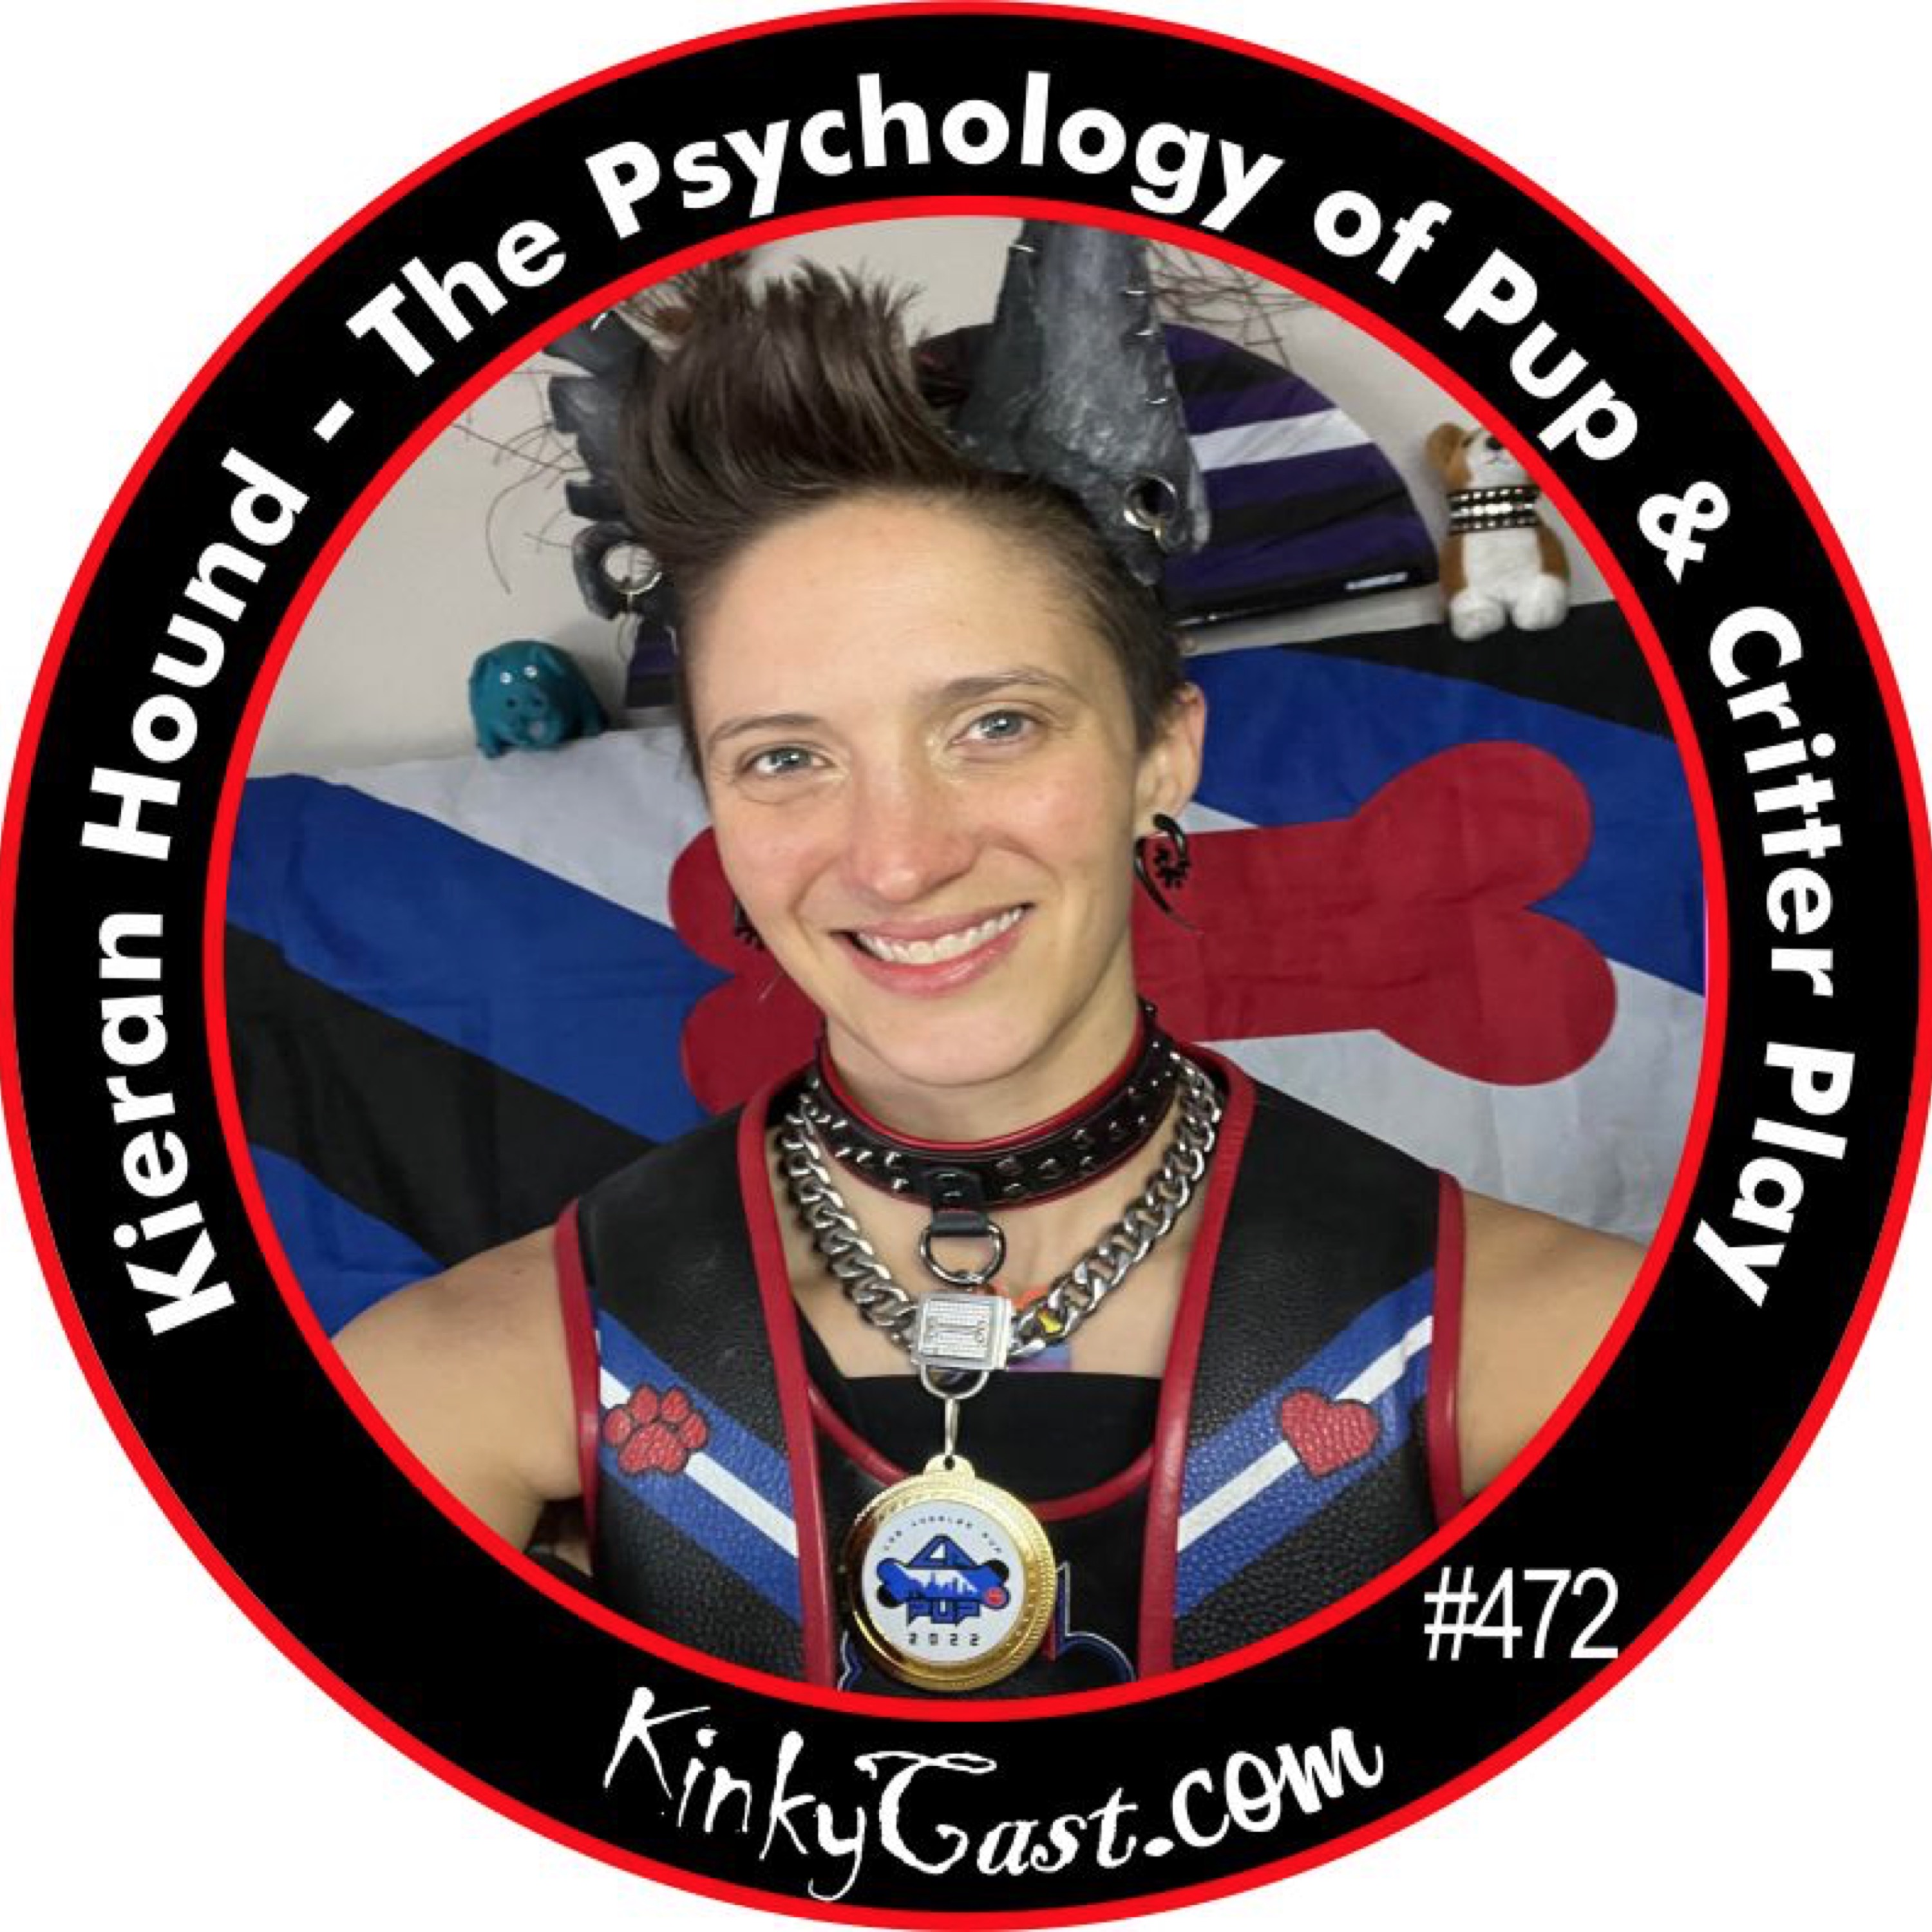 #472 - Kieran Hound - The Psychology of Pup and Critter Play